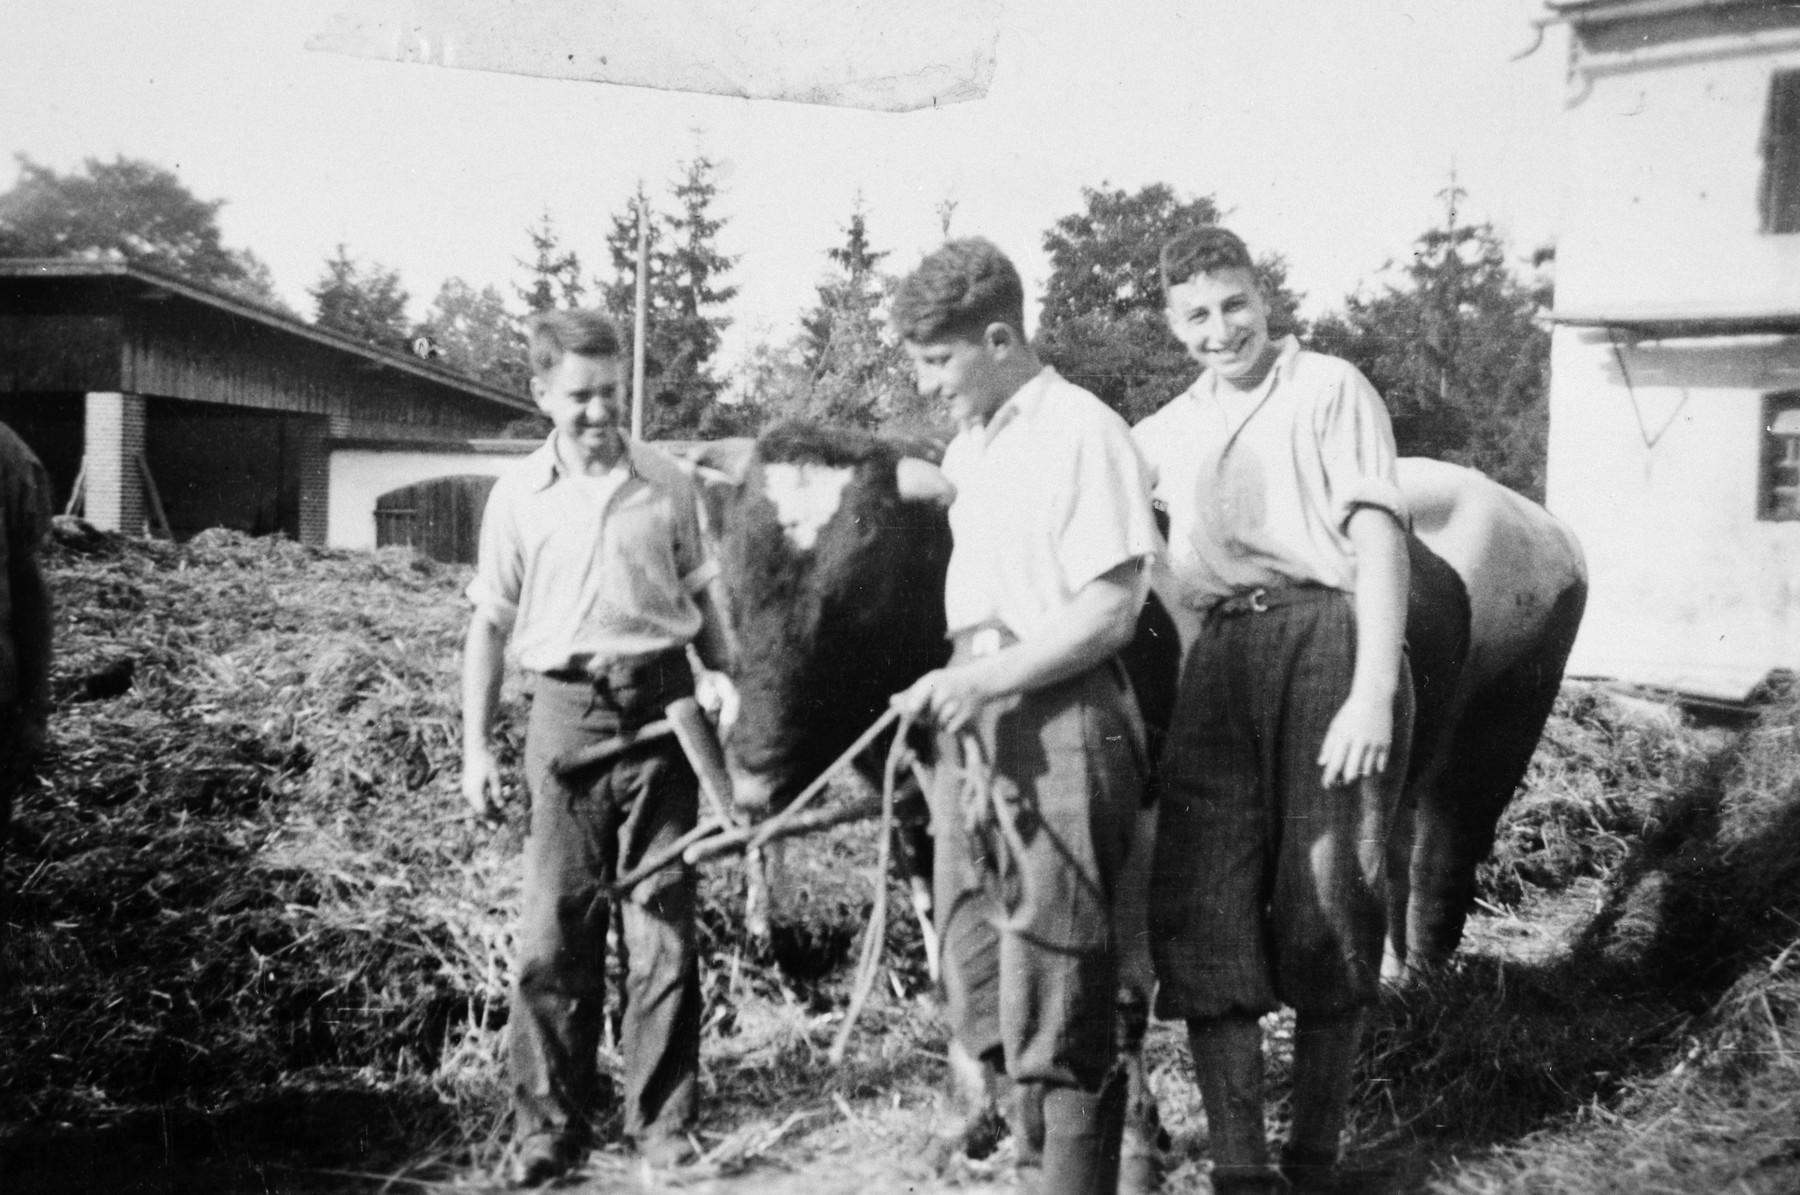 Three young Jews take care of a cow in the Gross Breesen agricultural training center. George Landecker is pictured in the center.